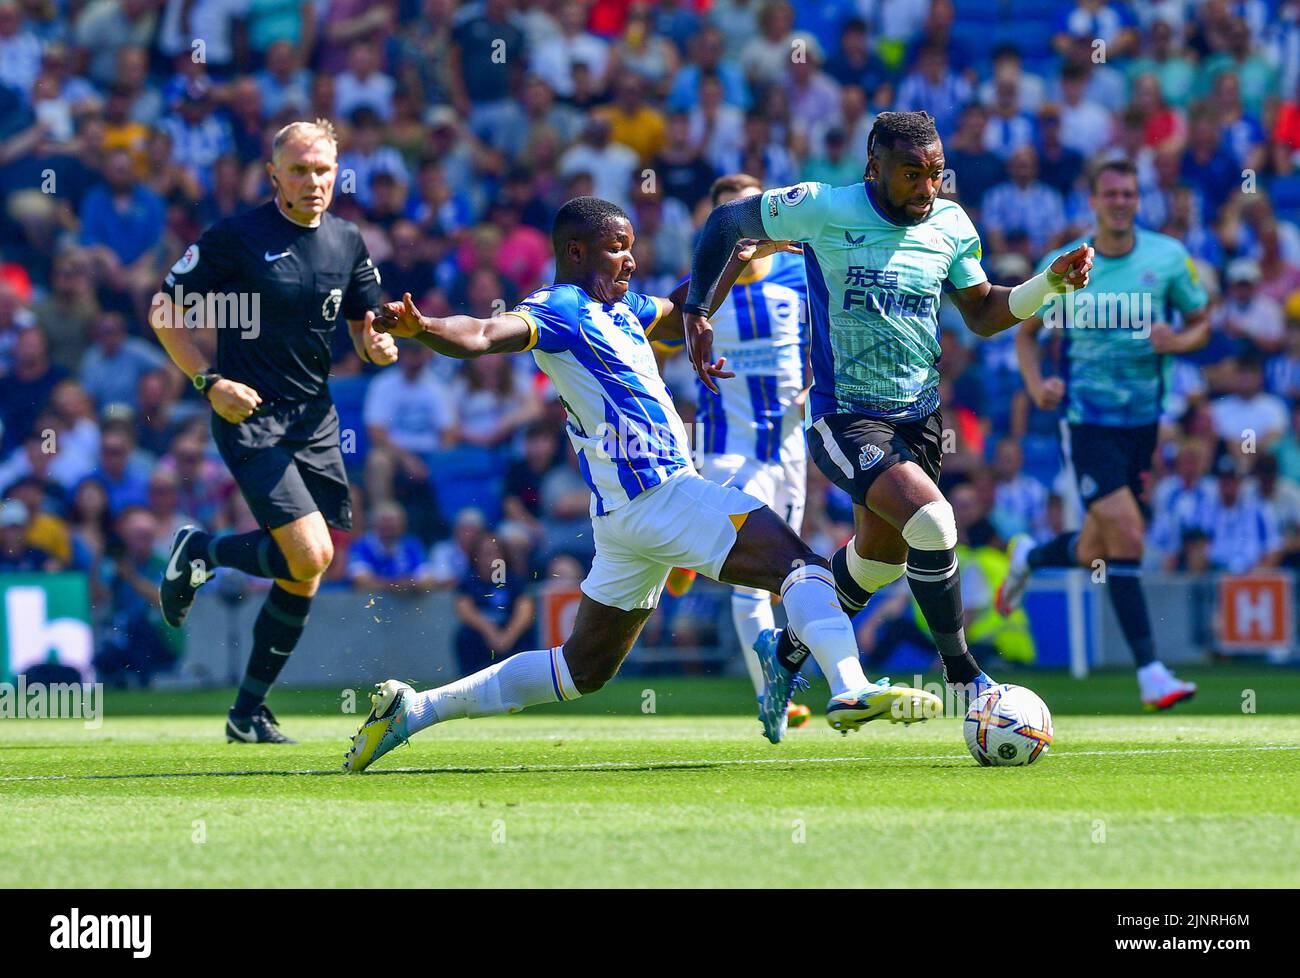 Brighton, UK. 13th Aug, 2022. Moises Caicedo of Brighton and Hove Albion and Allan Saint-Maximin of Newcastle United during the Premier League match between Brighton & Hove Albion and Newcastle United at The Amex on August 13th 2022 in Brighton, England. (Photo by Jeff Mood/phcimages.com) Credit: PHC Images/Alamy Live News Stock Photo